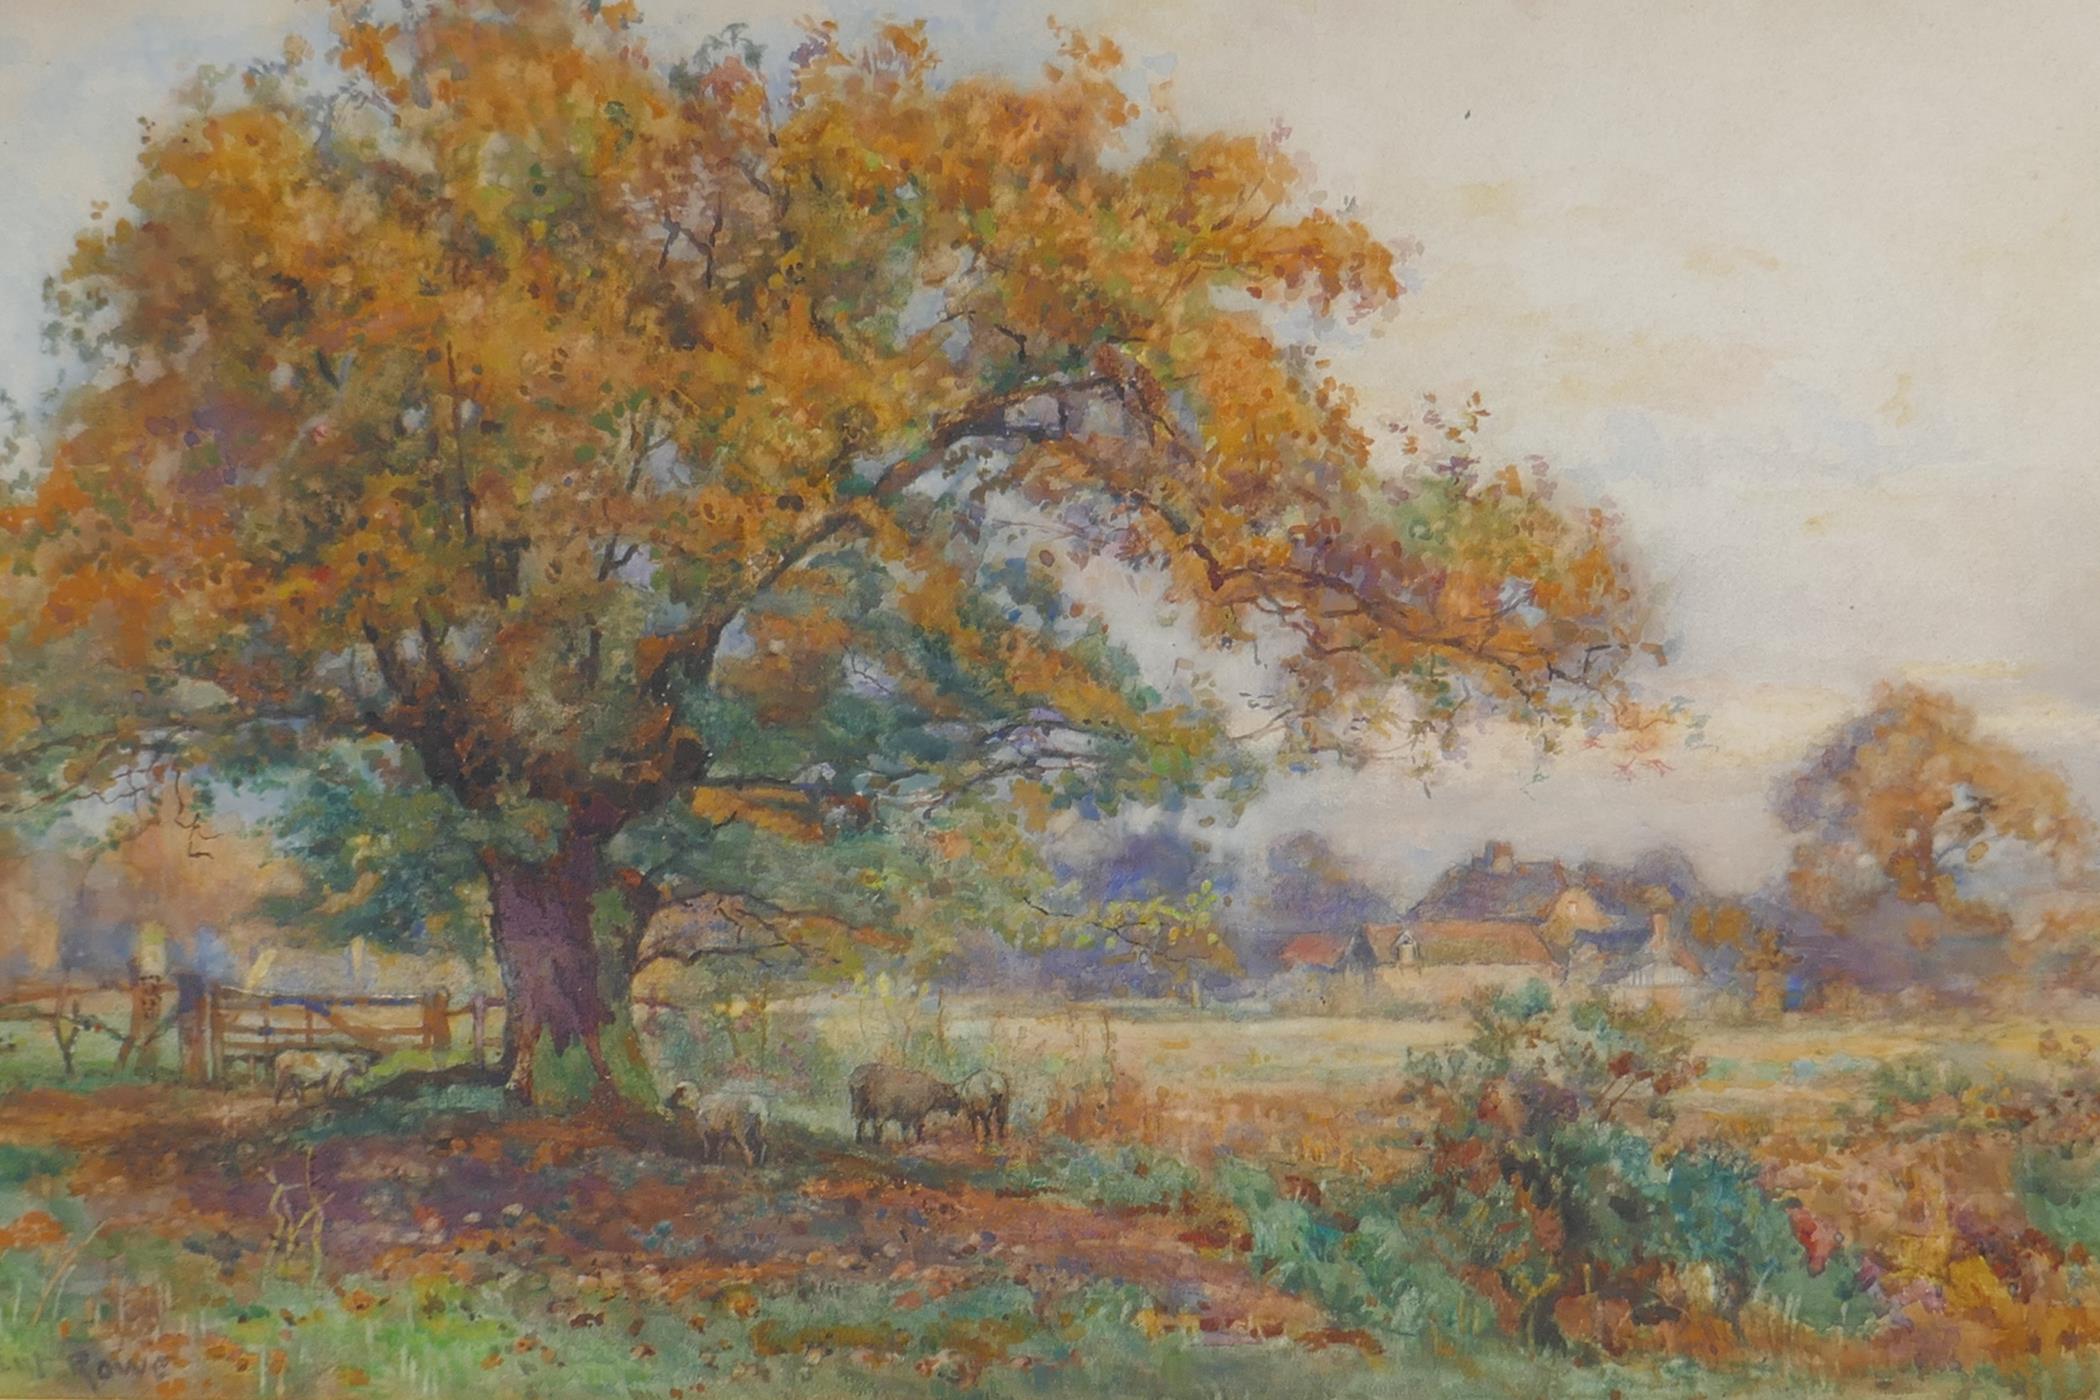 Sidney Grant Rowe, landscape with sheep under a tree, inscribed on frame 'Under the Oak Tree',